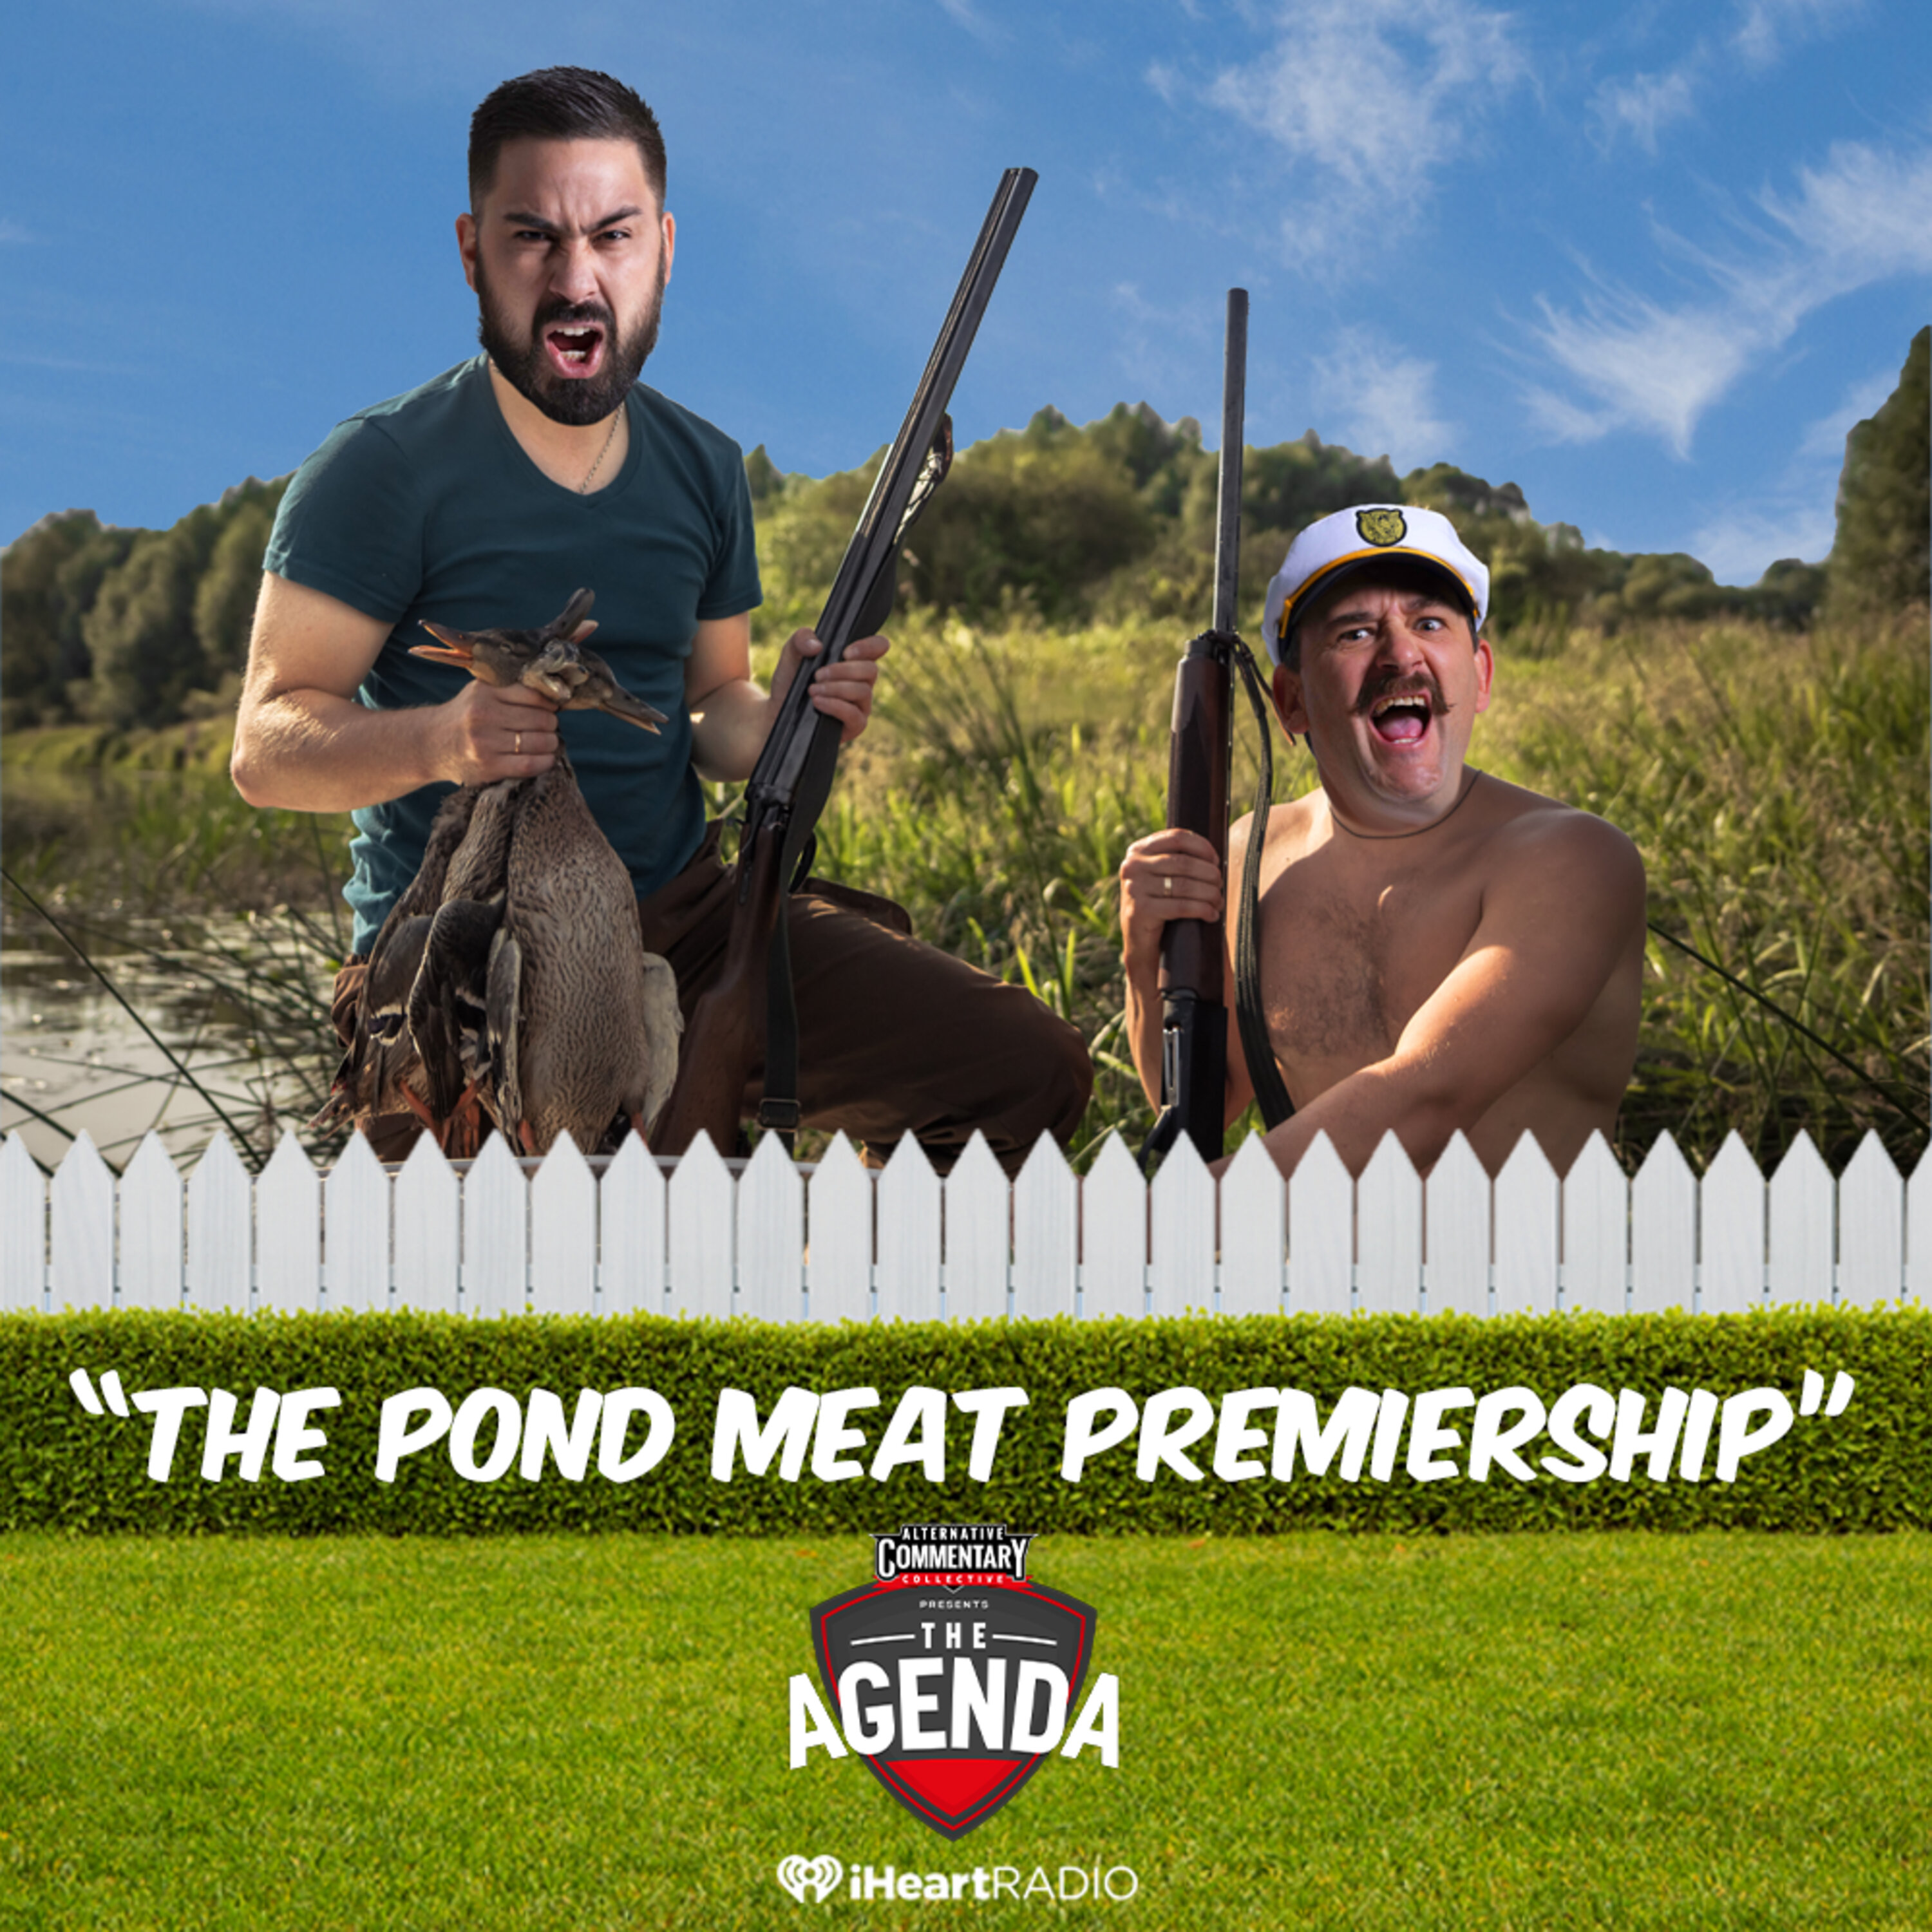 "The Pond Meat Premiership"